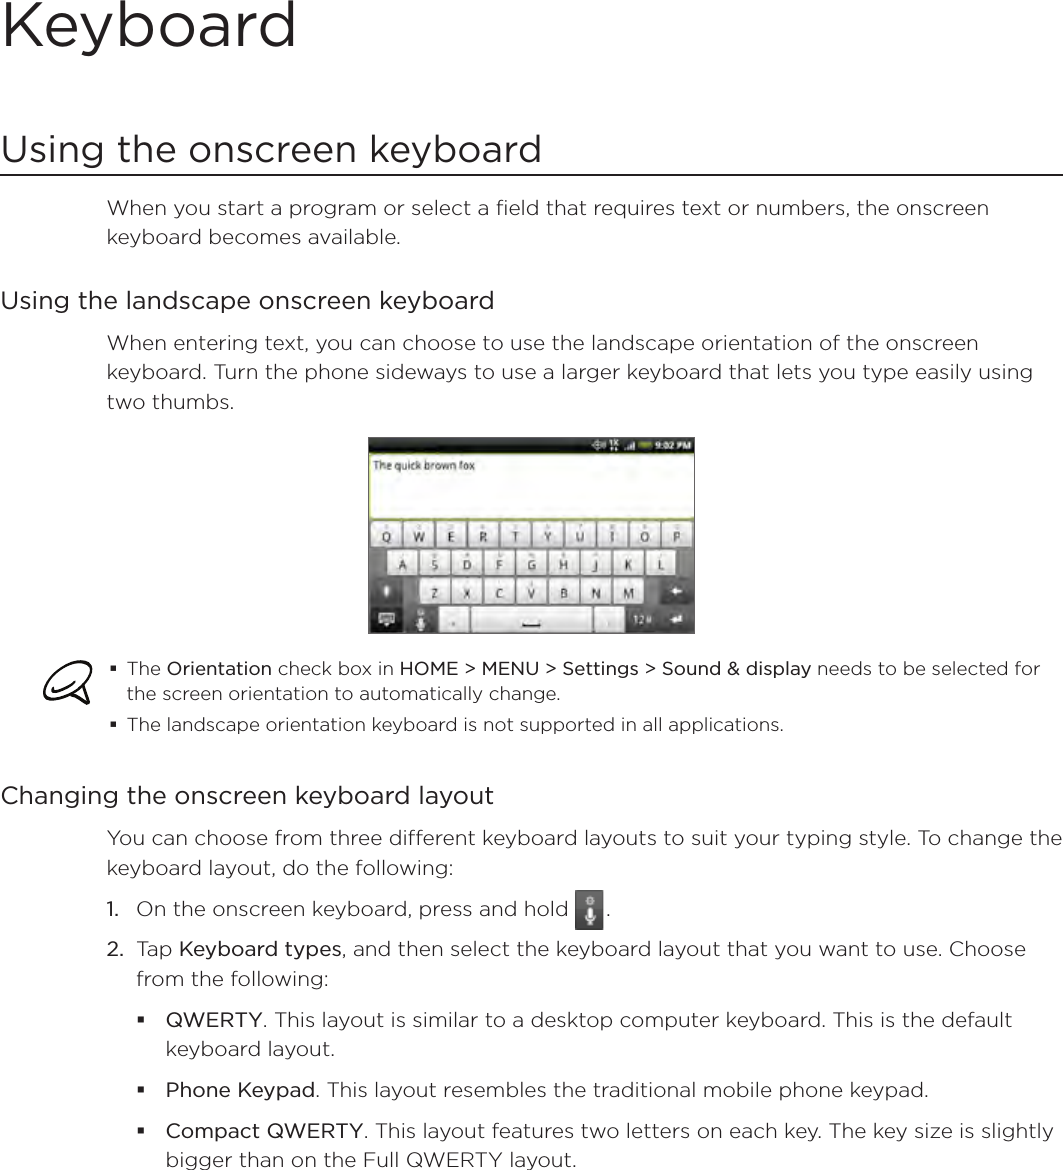 KeyboardUsing the onscreen keyboardWhen you start a program or select a field that requires text or numbers, the onscreen keyboard becomes available.Using the landscape onscreen keyboardWhen entering text, you can choose to use the landscape orientation of the onscreen keyboard. Turn the phone sideways to use a larger keyboard that lets you type easily using two thumbs. The Orientation check box in HOME &gt; MENU &gt; Settings &gt; Sound &amp; display needs to be selected for the screen orientation to automatically change.The landscape orientation keyboard is not supported in all applications. Changing the onscreen keyboard layoutYou can choose from three different keyboard layouts to suit your typing style. To change the keyboard layout, do the following:On the onscreen keyboard, press and hold   .Tap Keyboard types, and then select the keyboard layout that you want to use. Choose from the following:QWERTY. This layout is similar to a desktop computer keyboard. This is the default keyboard layout.Phone Keypad. This layout resembles the traditional mobile phone keypad.Compact QWERTY. This layout features two letters on each key. The key size is slightly bigger than on the Full QWERTY layout.1.2.